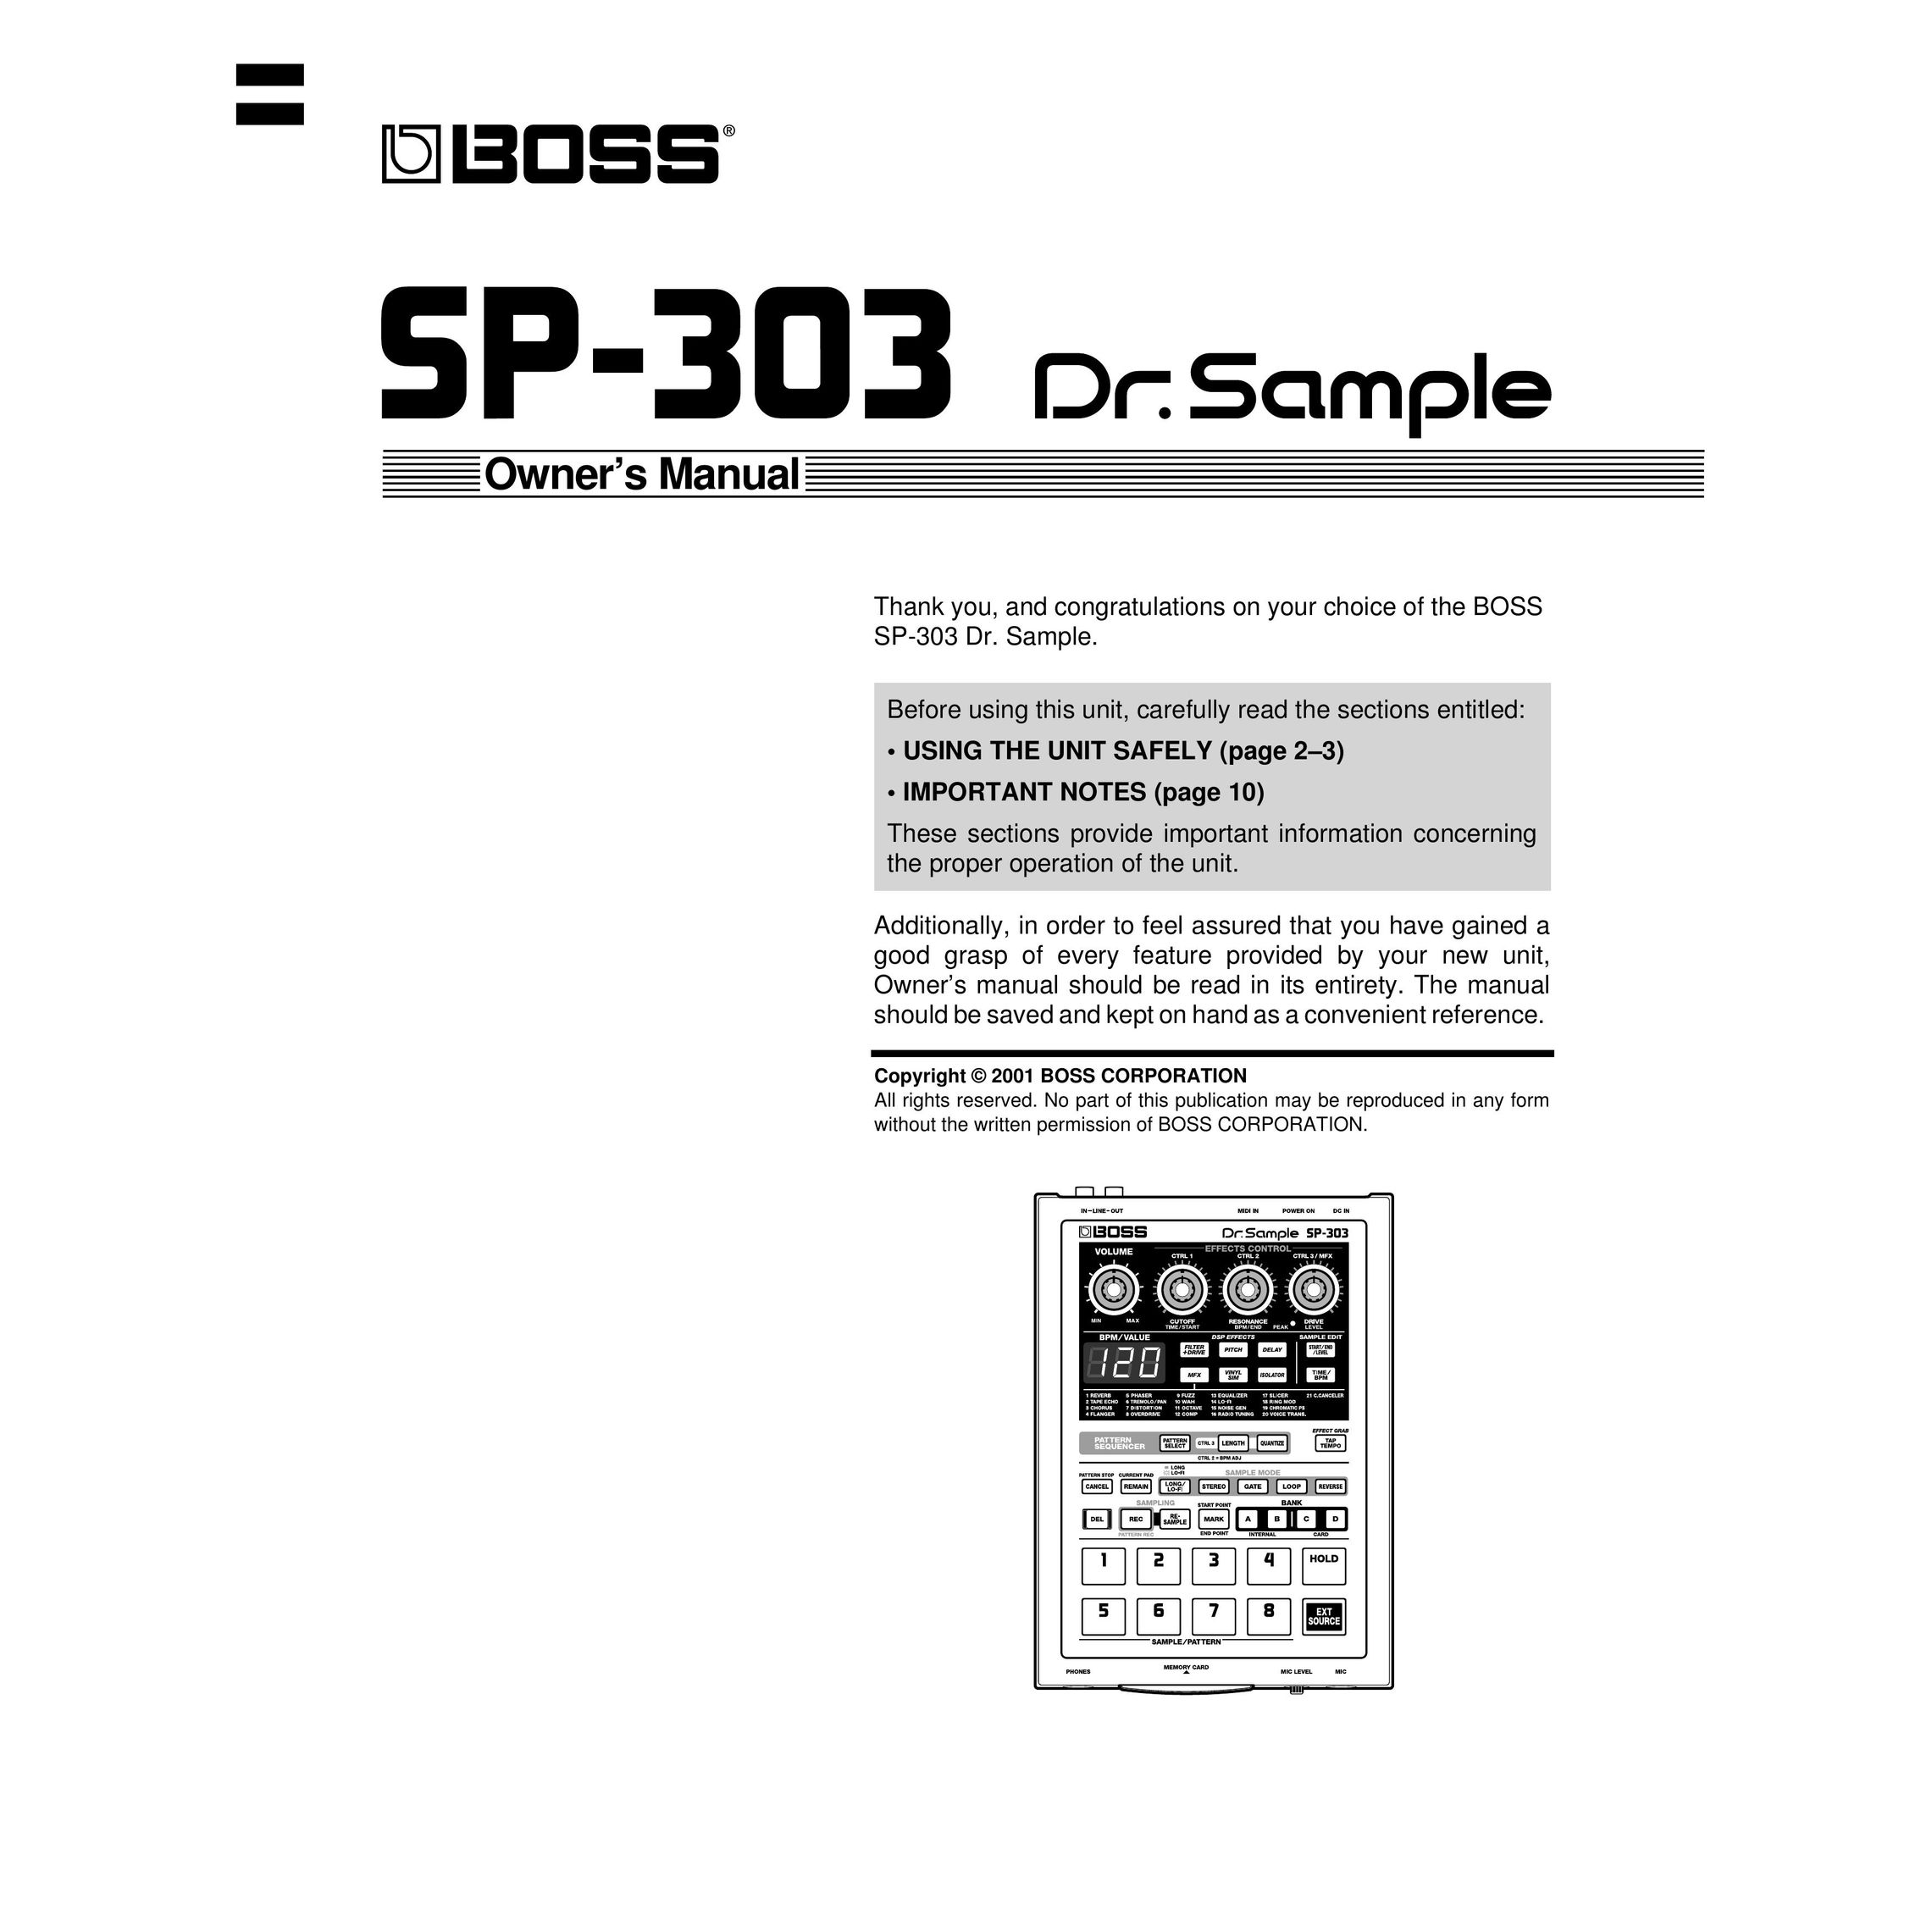 Roland SP-303 Network Card User Manual